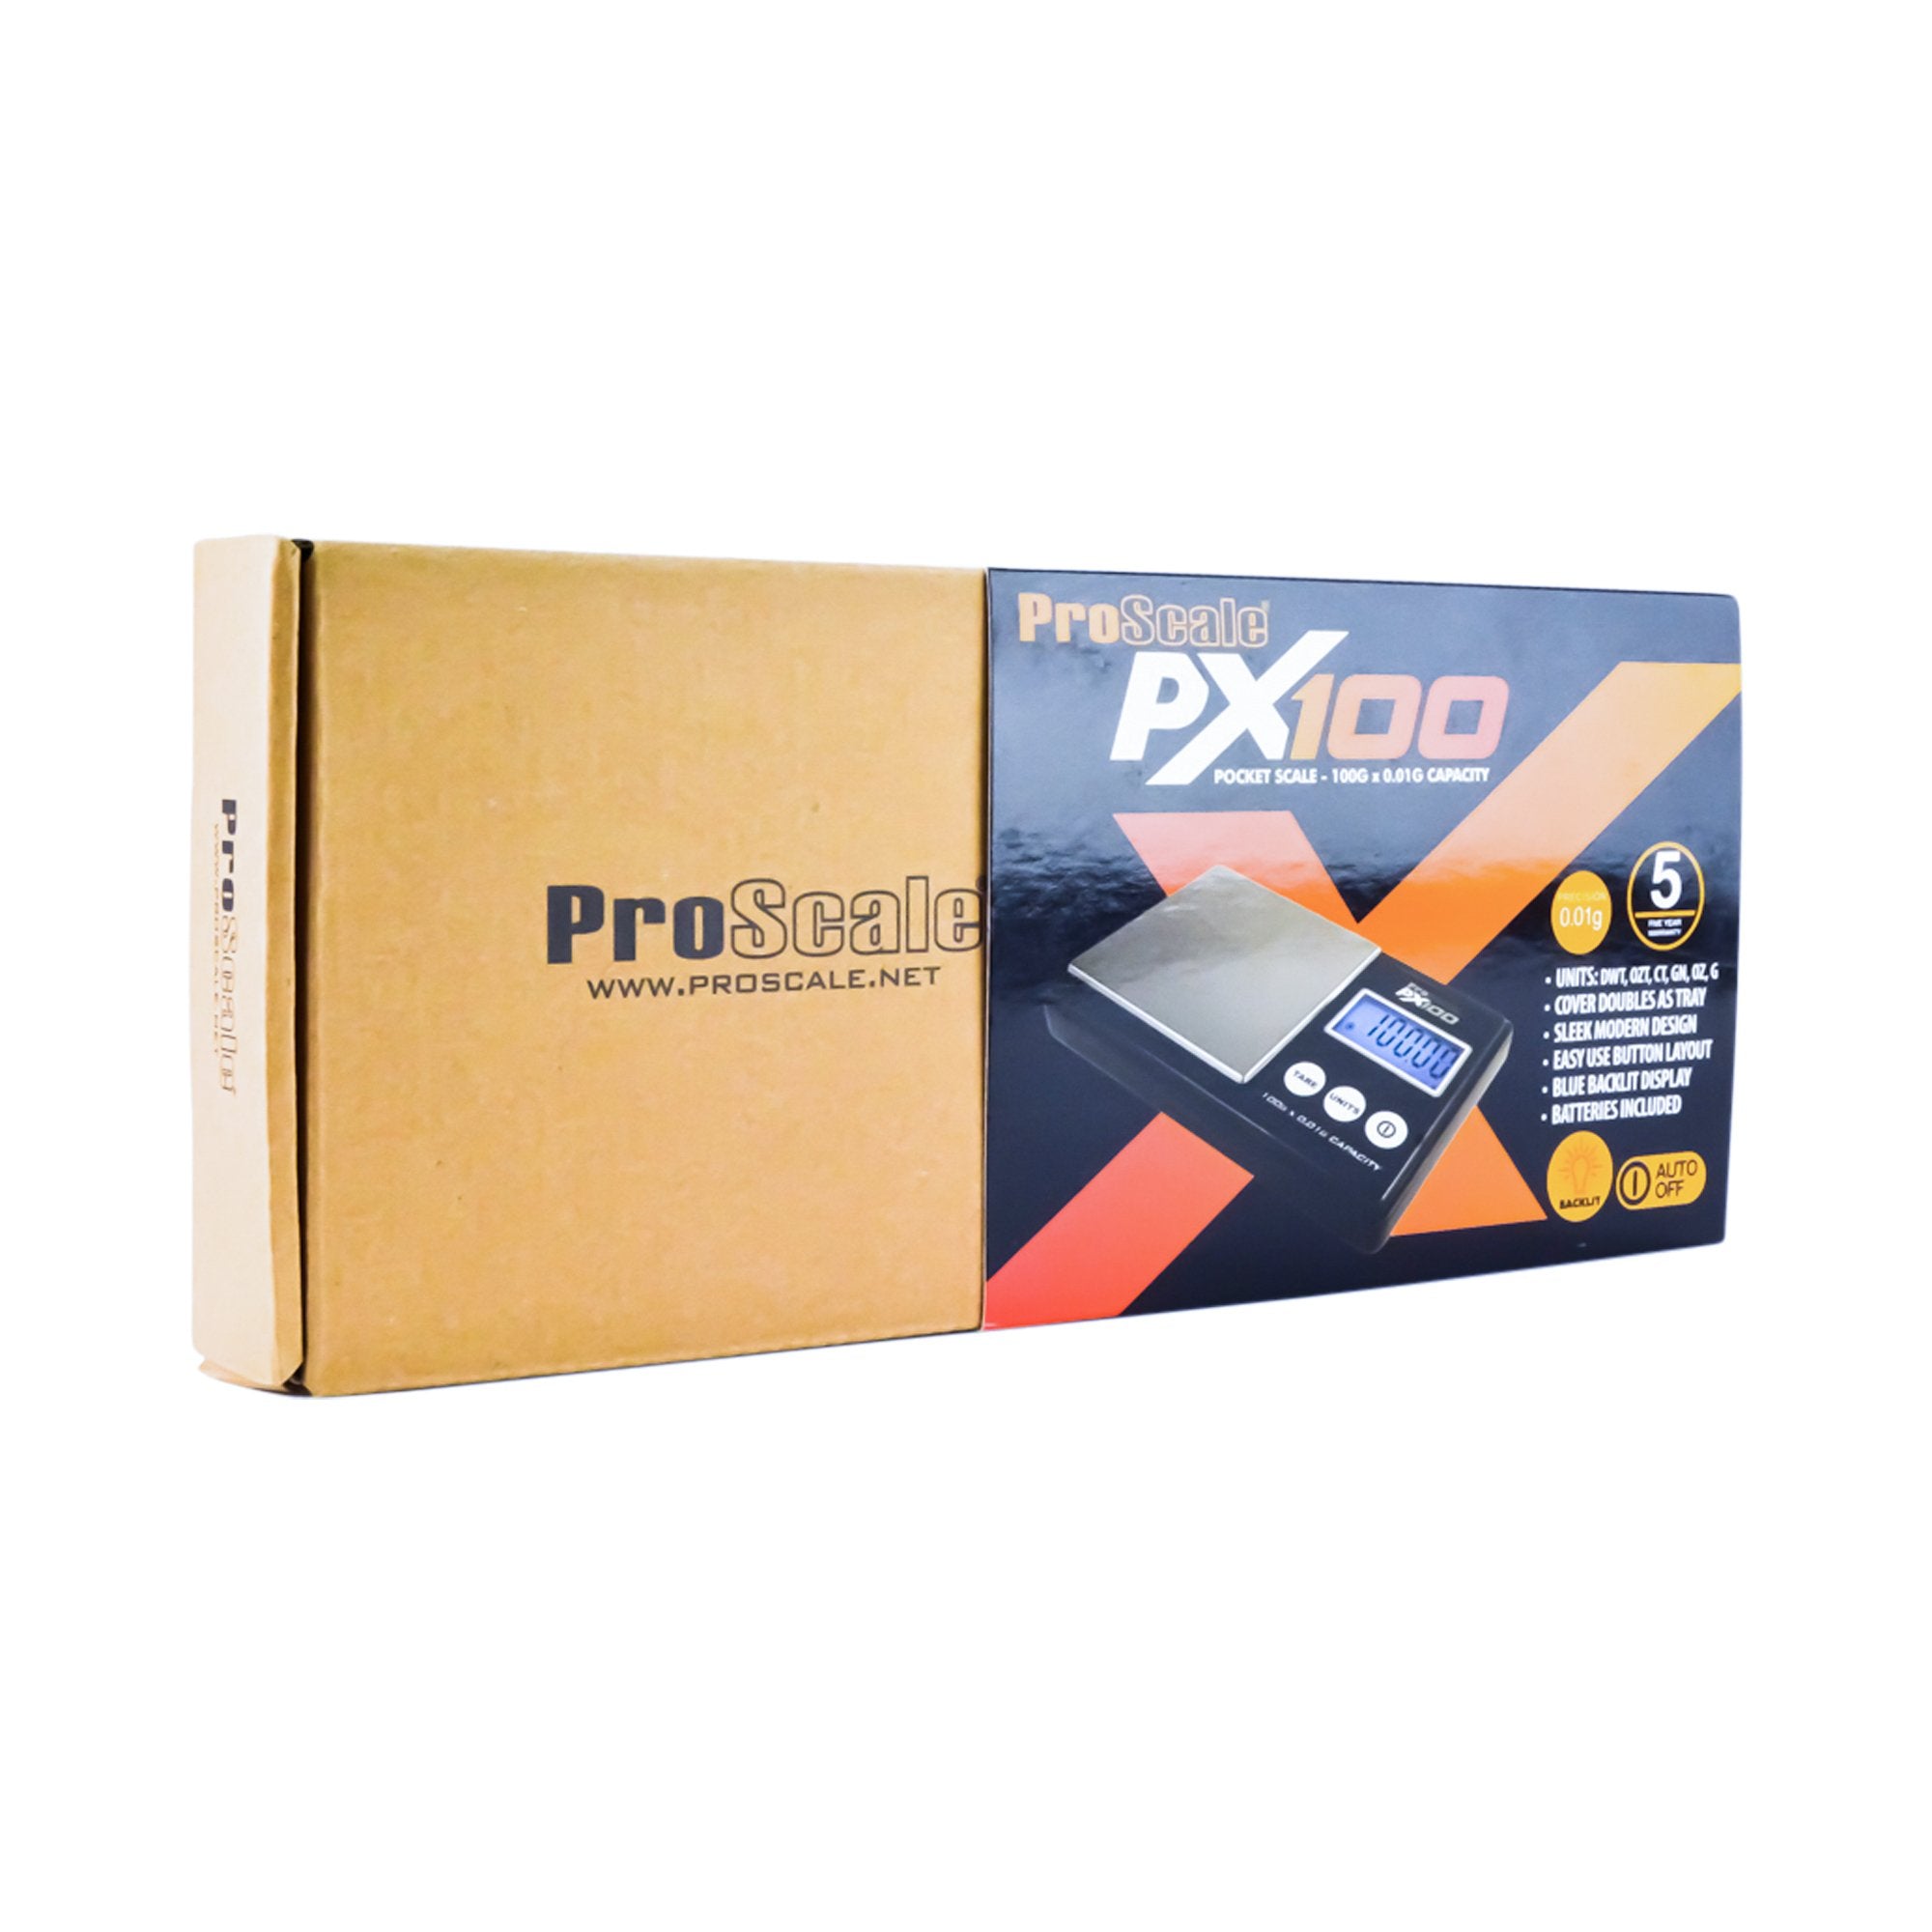 PRO SCALE | PX100 Digital Scale | 100g Capacity - 0.01g Readability - 6